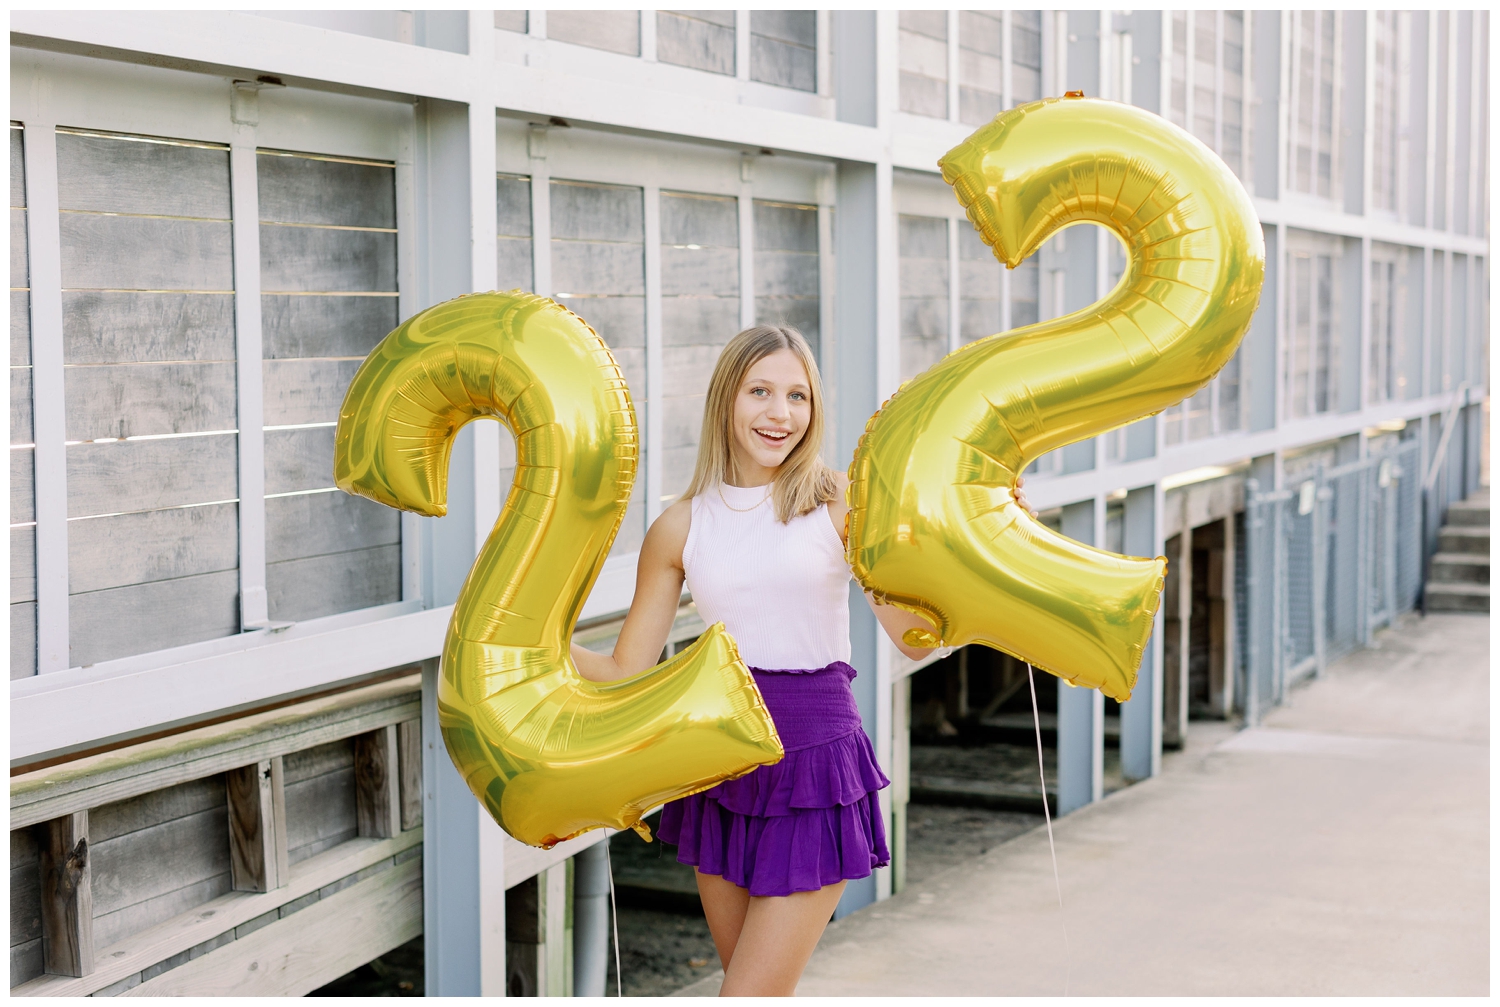 Houston senior pictures with balloons with girl holding 22 number balloons